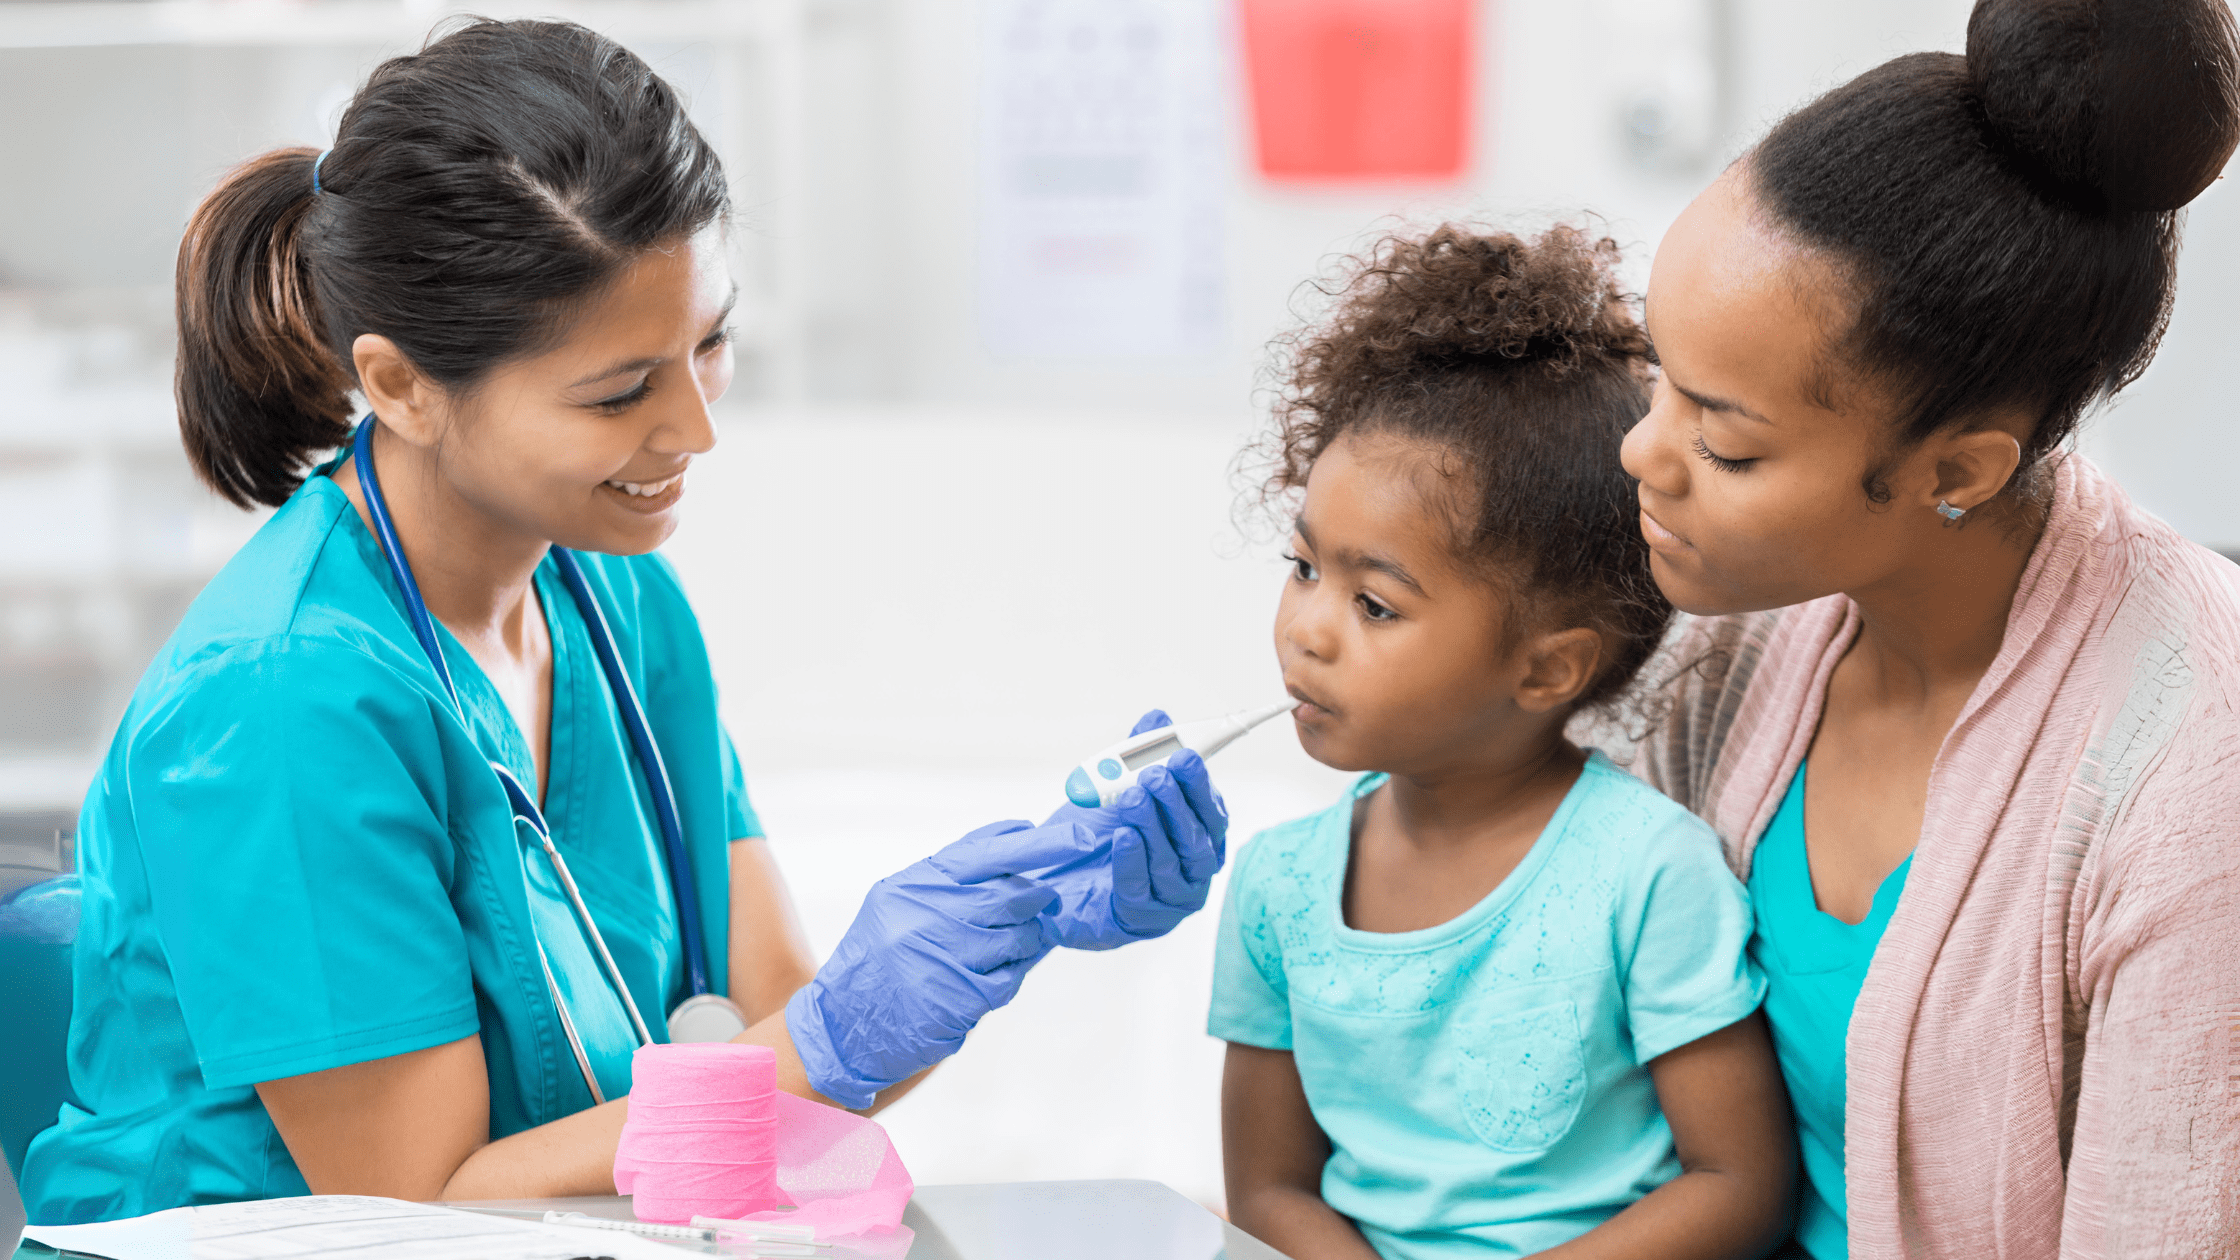 A medical school student on their pediatric clinical rotation treating a patient.